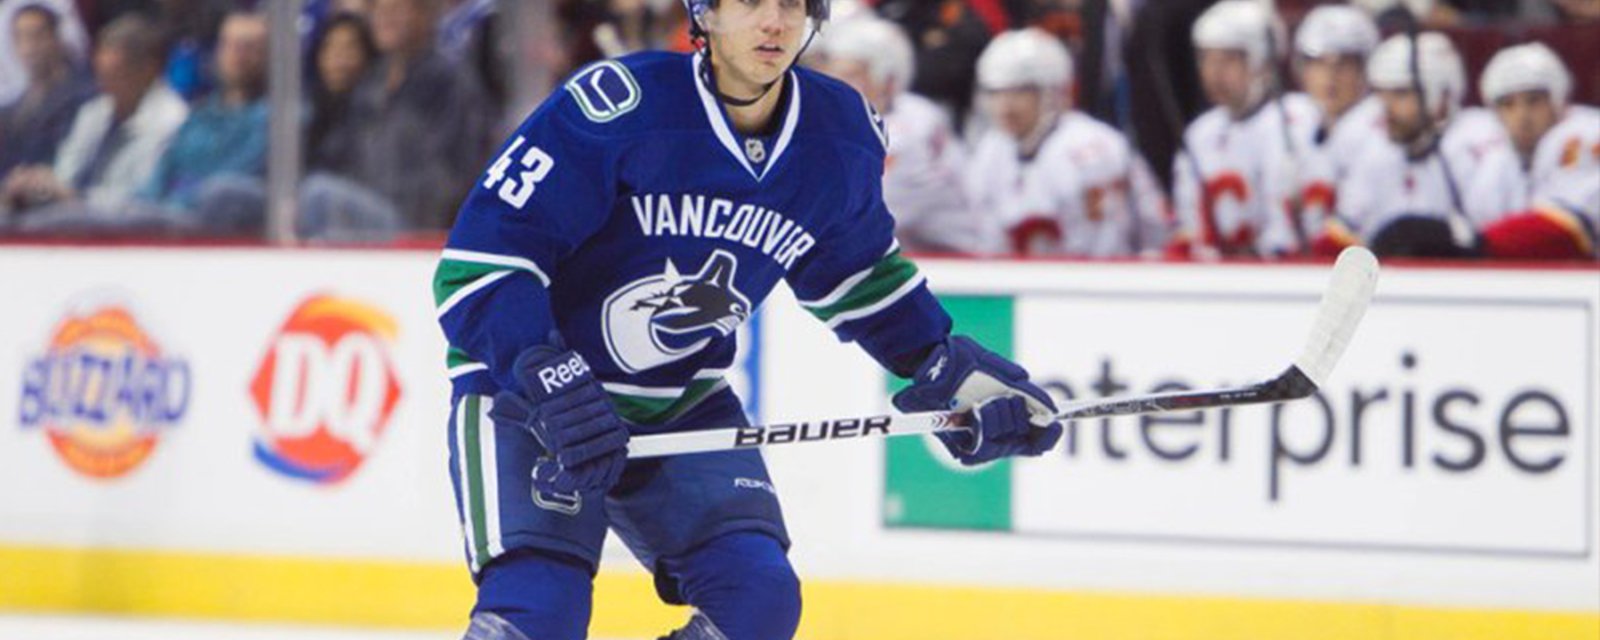 Report: Canucks' Rodin clears waivers